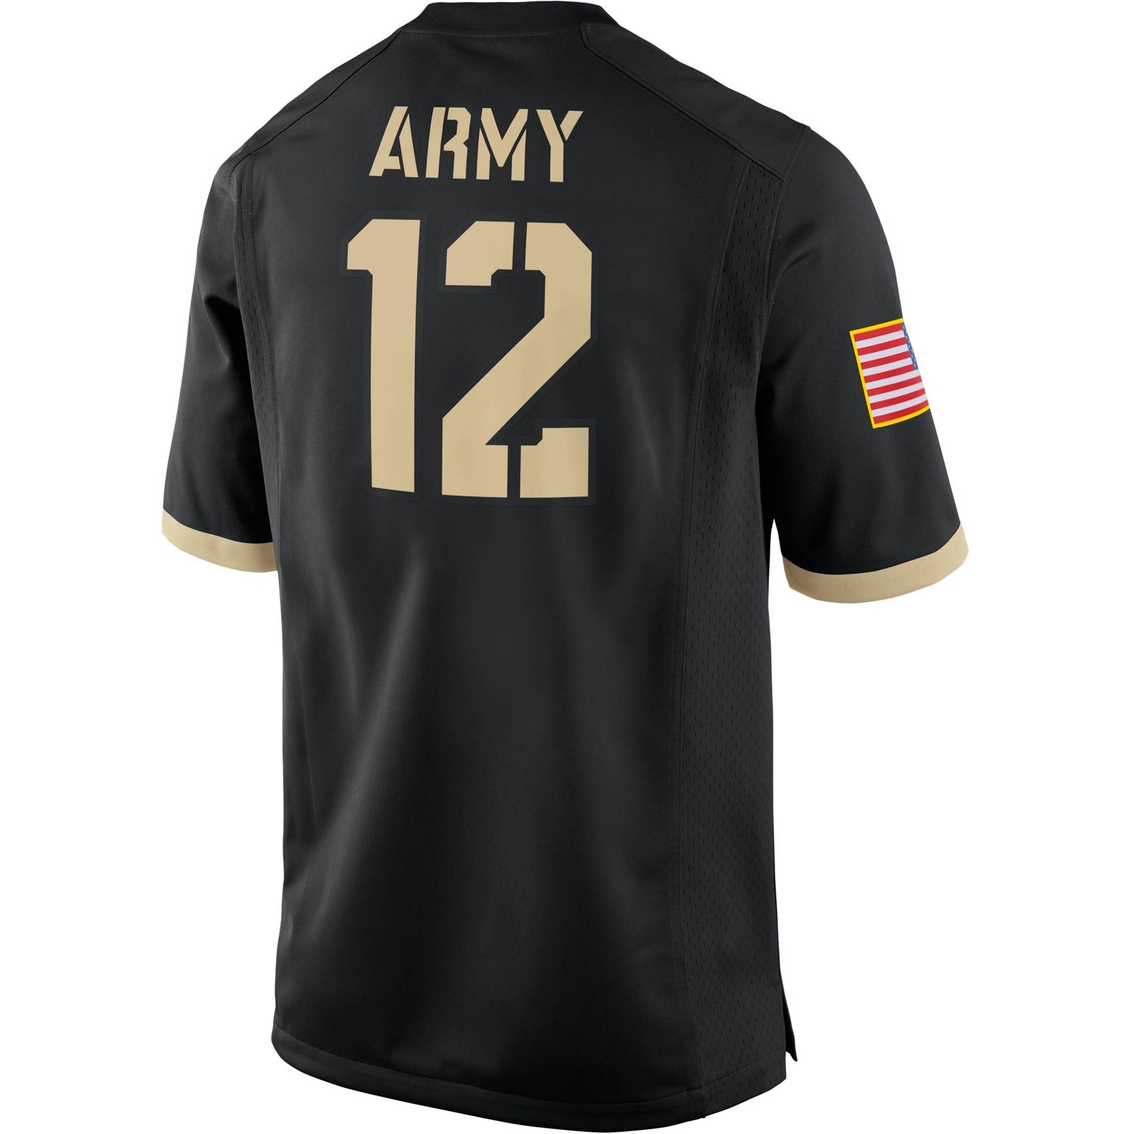 Nike Ncaa Army West Point Black Knights Football Game Jersey Clothing